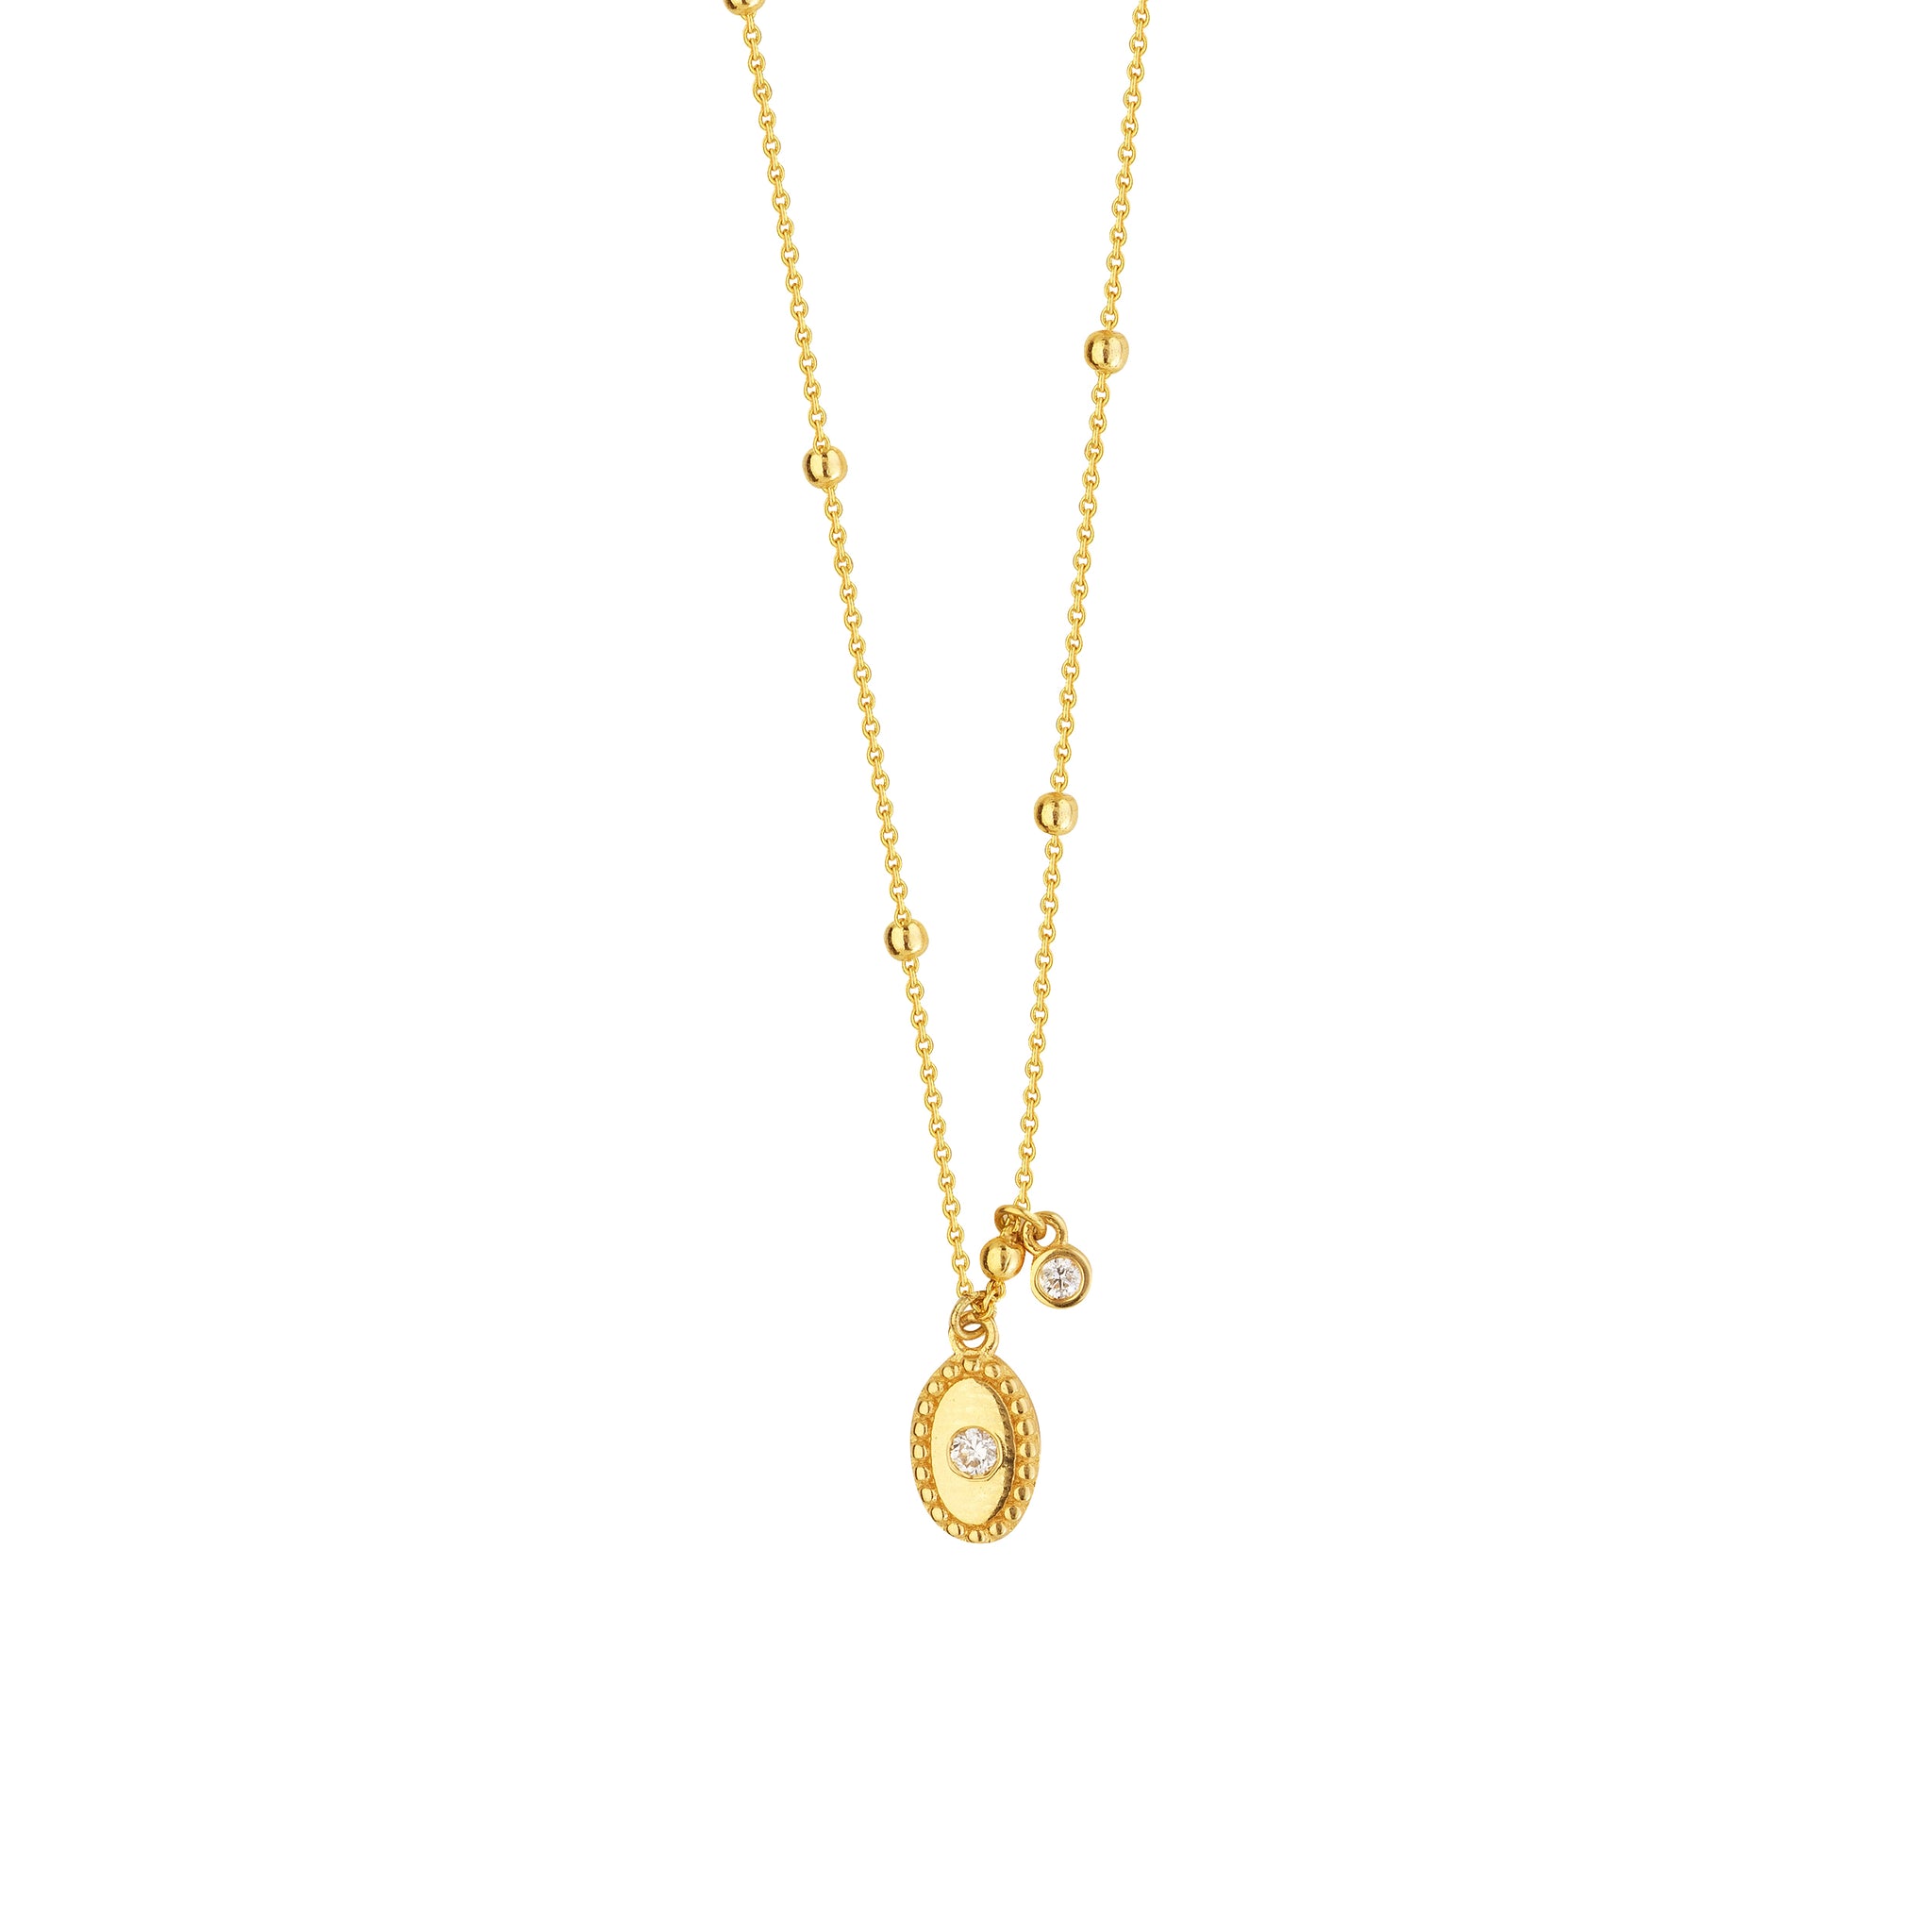 Hemsleys Collection 14K Yellow Gold Diamond Oval Disc Necklace